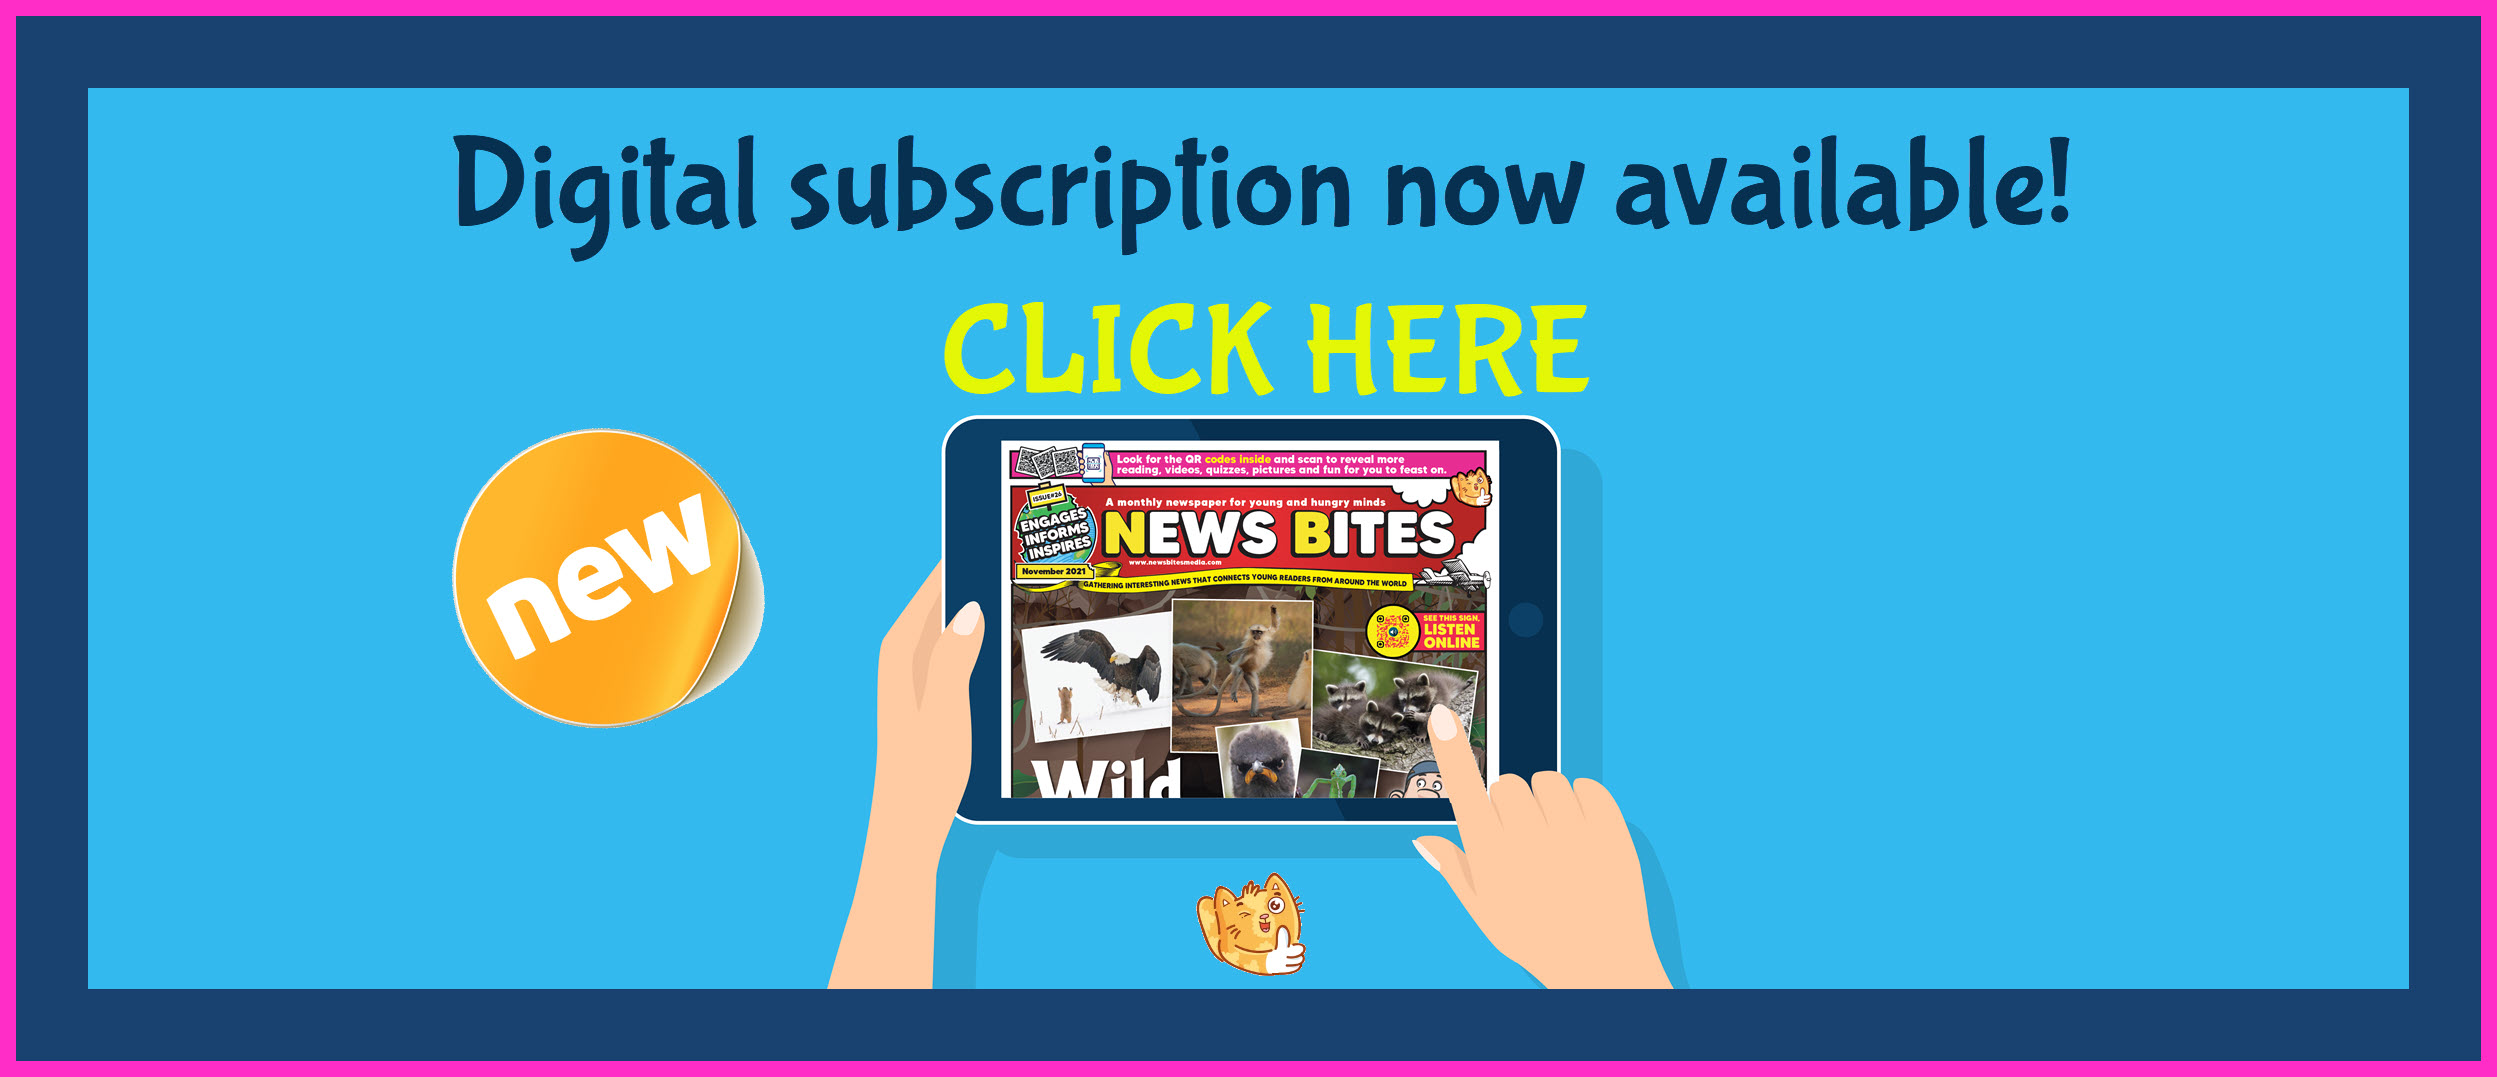 Click here to subscribe to your digital subscription of News Bites! 